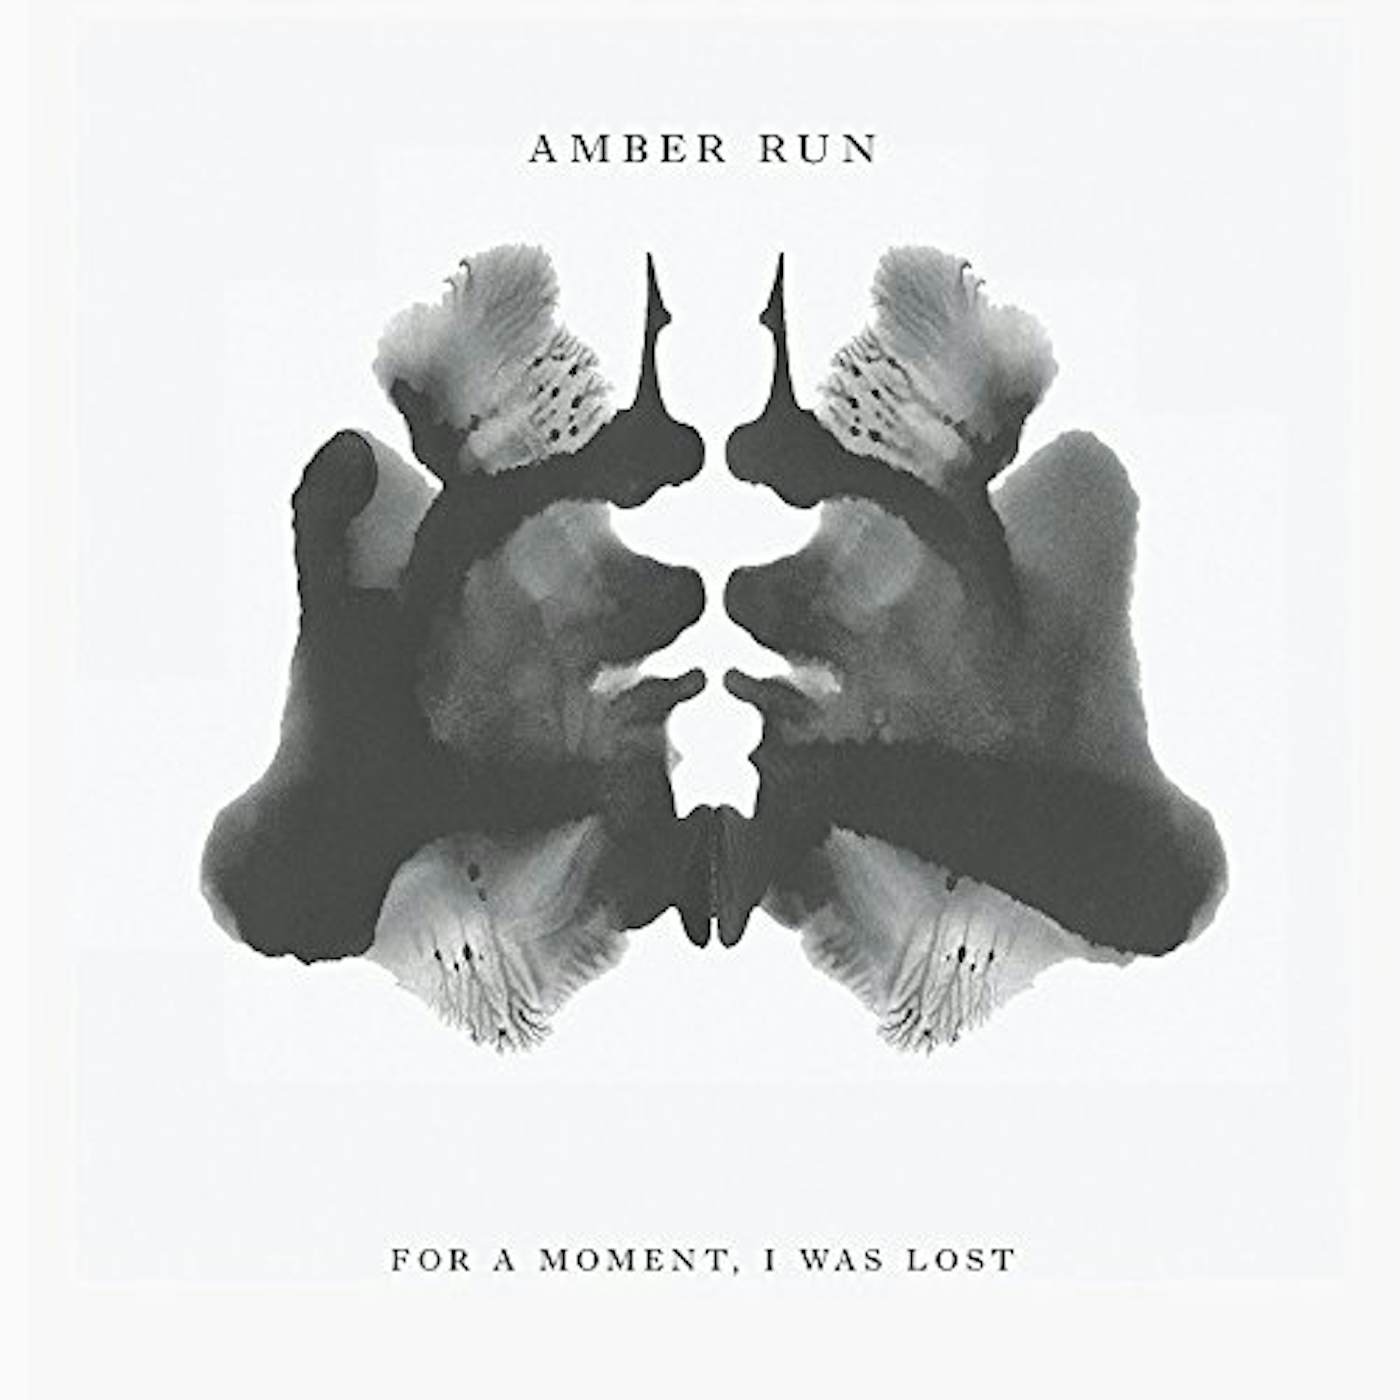 Amber Run FOR A MOMENT I WAS LOST Vinyl Record